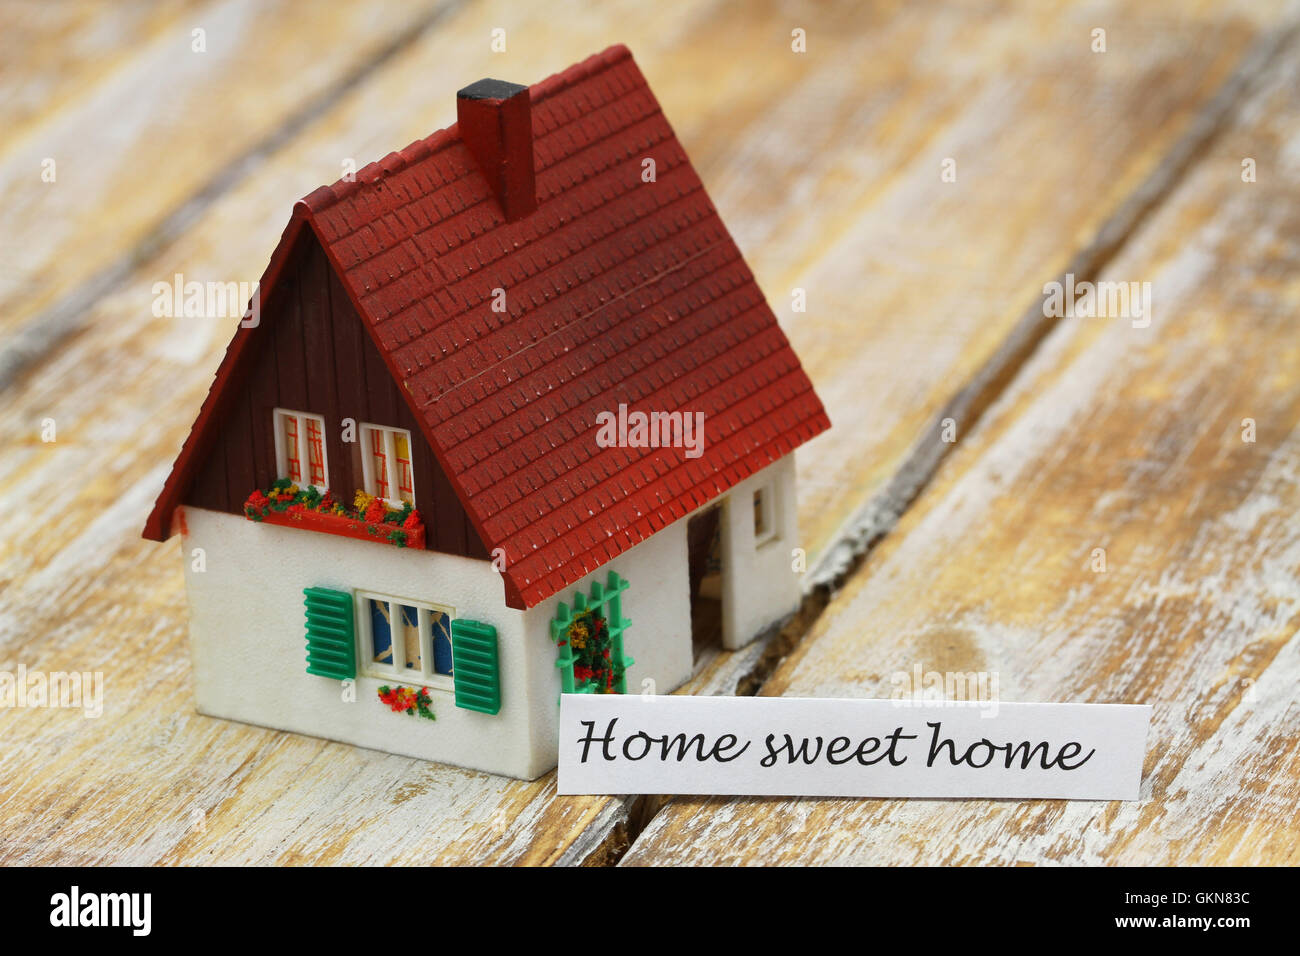 Home sweet home card with miniature model of a house Stock Photo